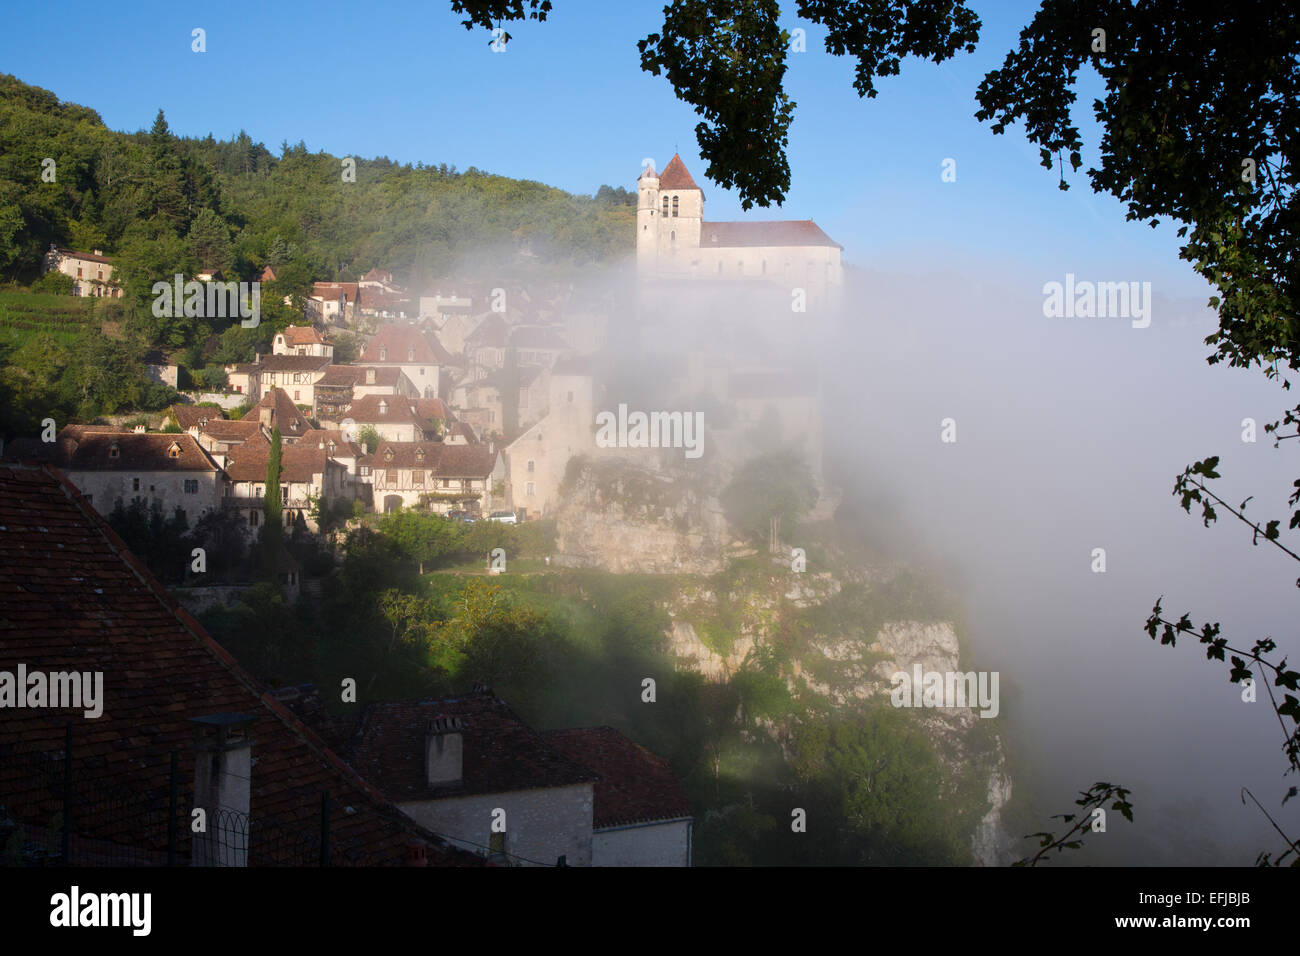 France, Midi-Pyrenees, Lot, Cahors, St Cirq-Lapopie, early morning river mist clears the village on a sunlit September day Stock Photo